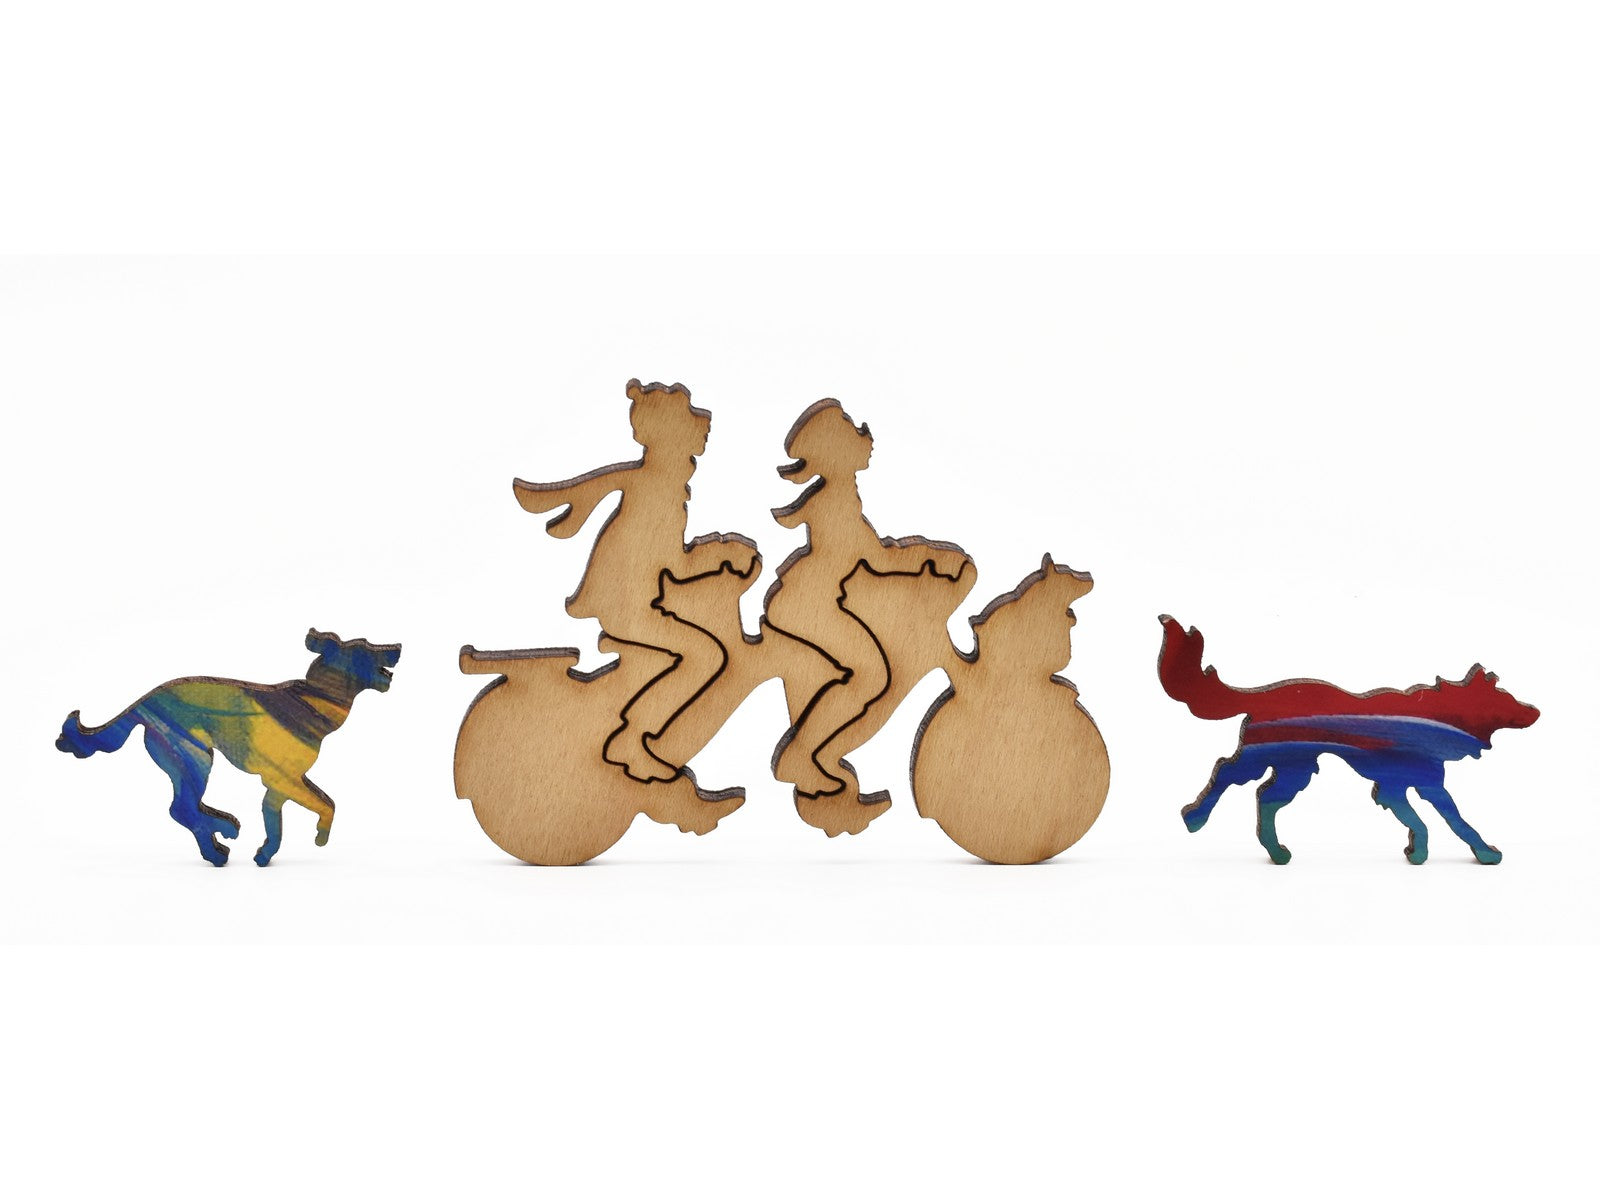 A closeup of pieces in the shape of people riding a tandem bike and two dogs.